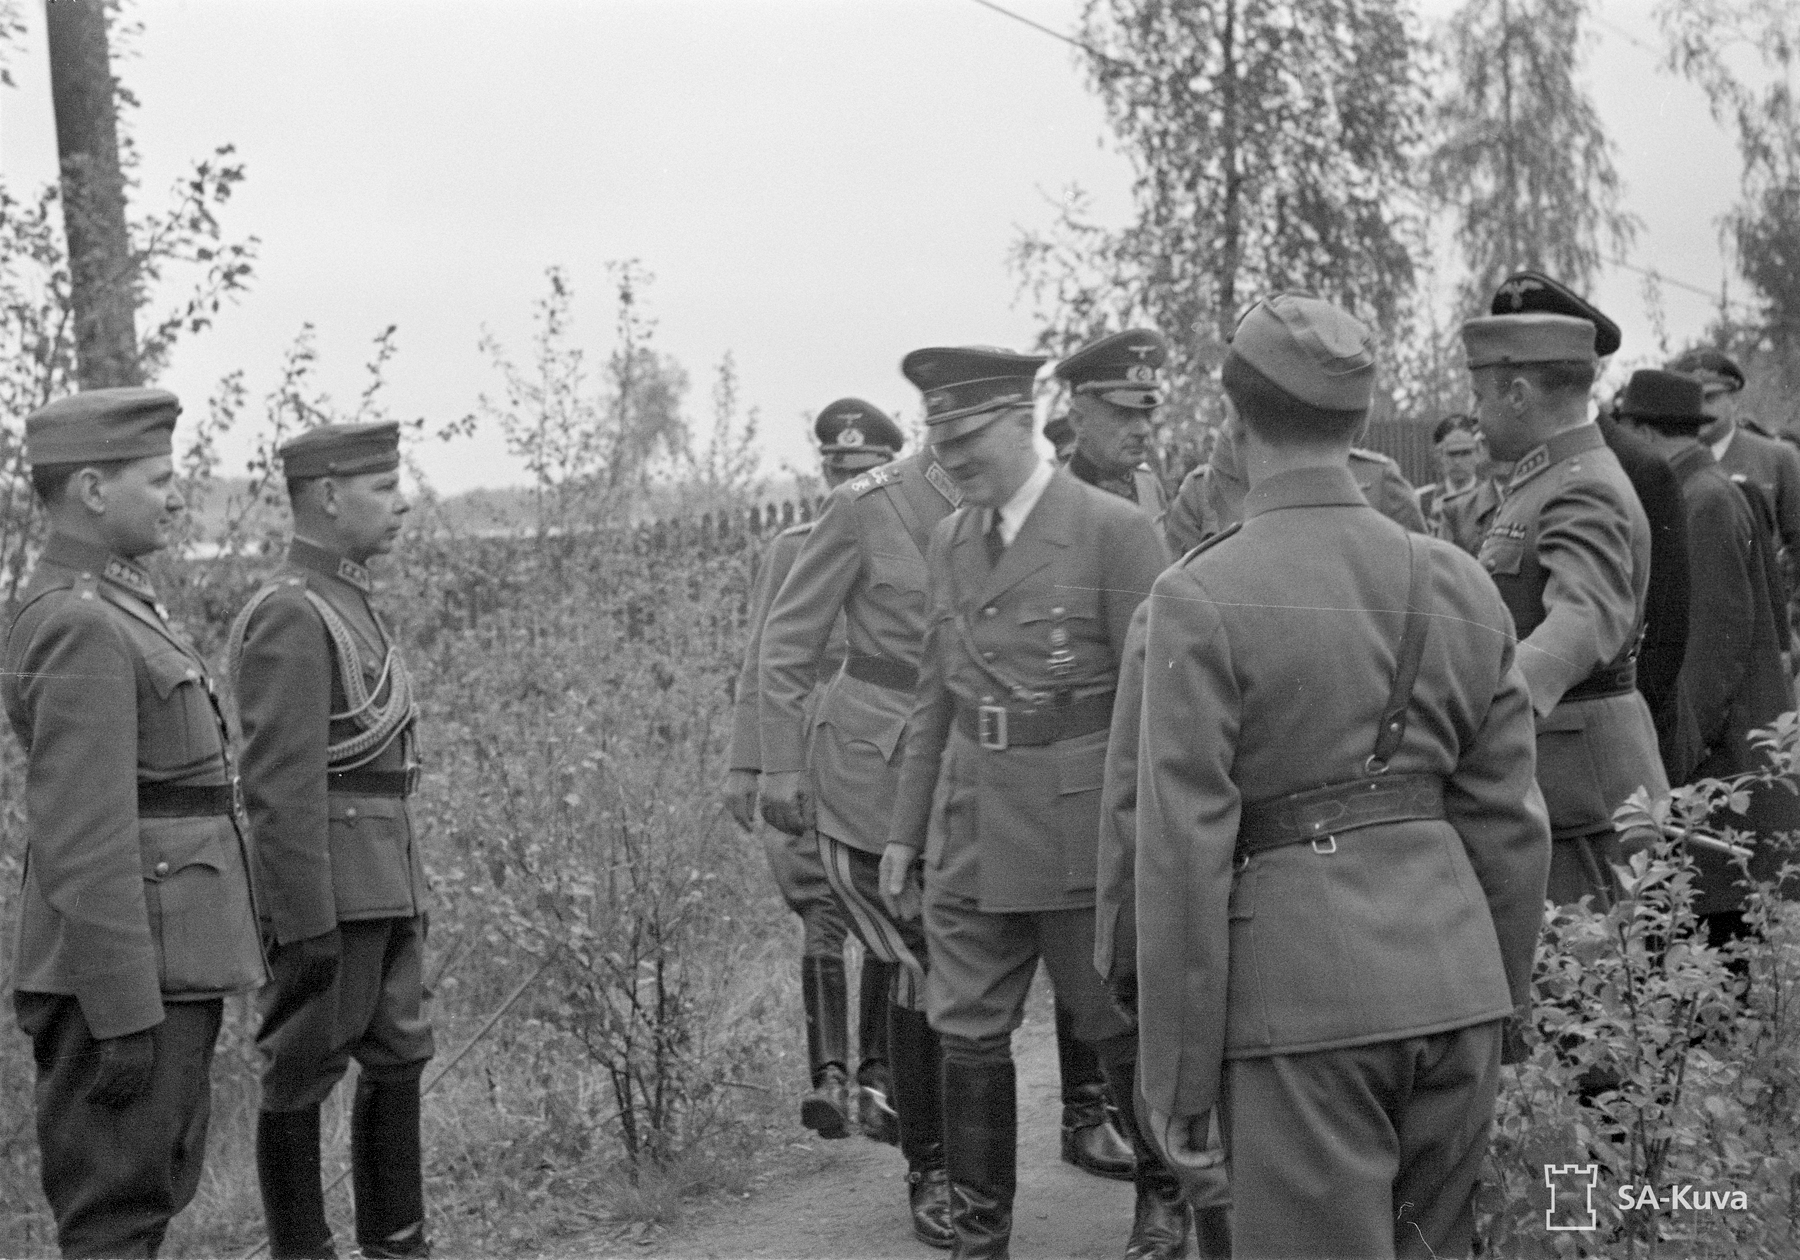 Hitler greets officers during his visit in Finland